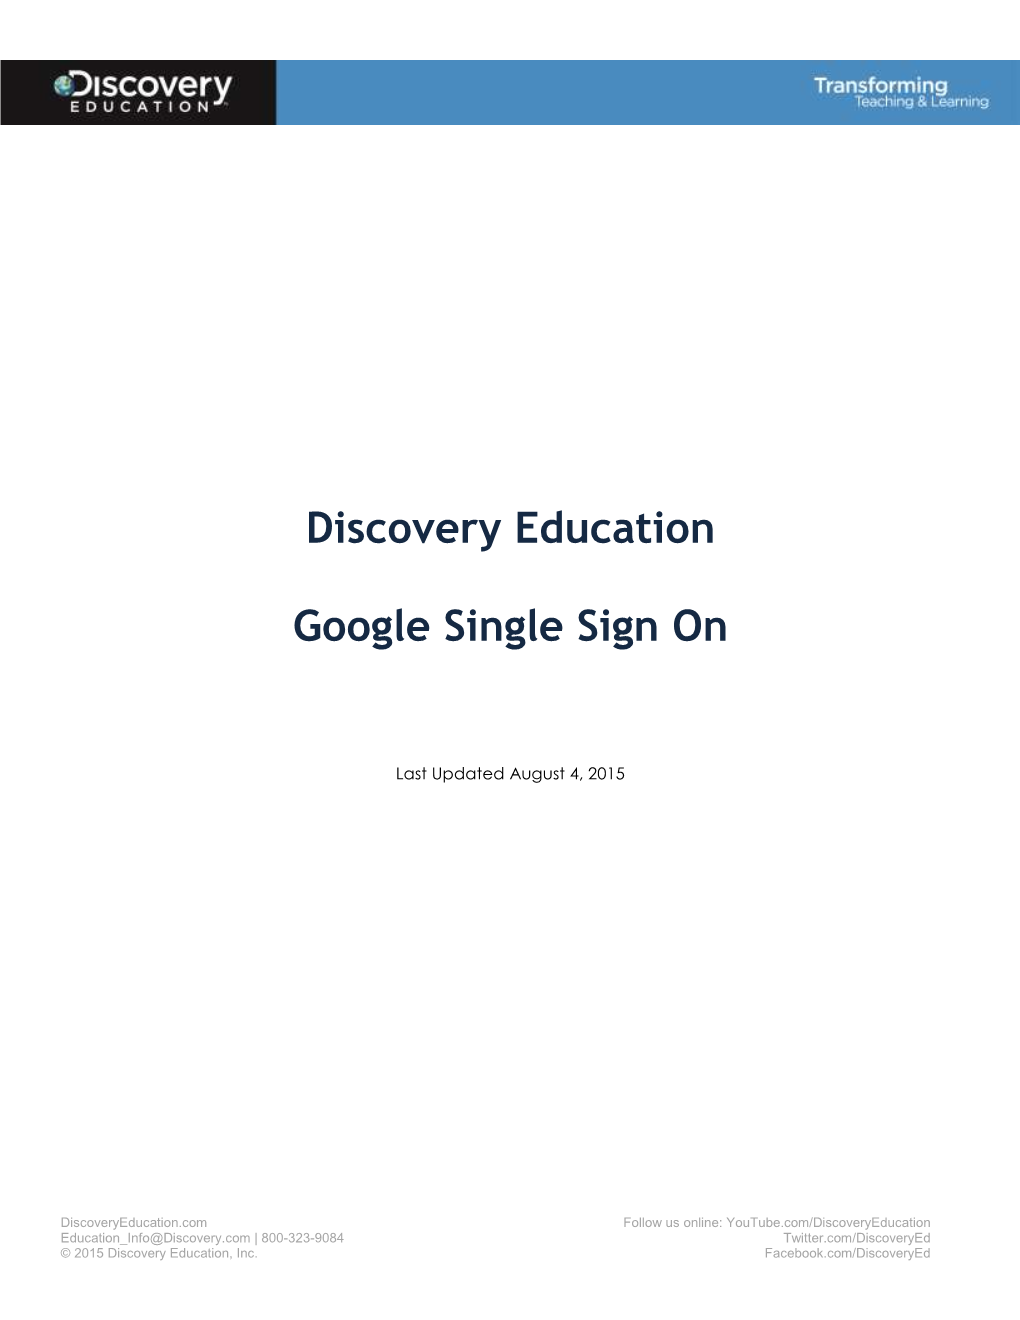 Discovery Education Google Single Sign On